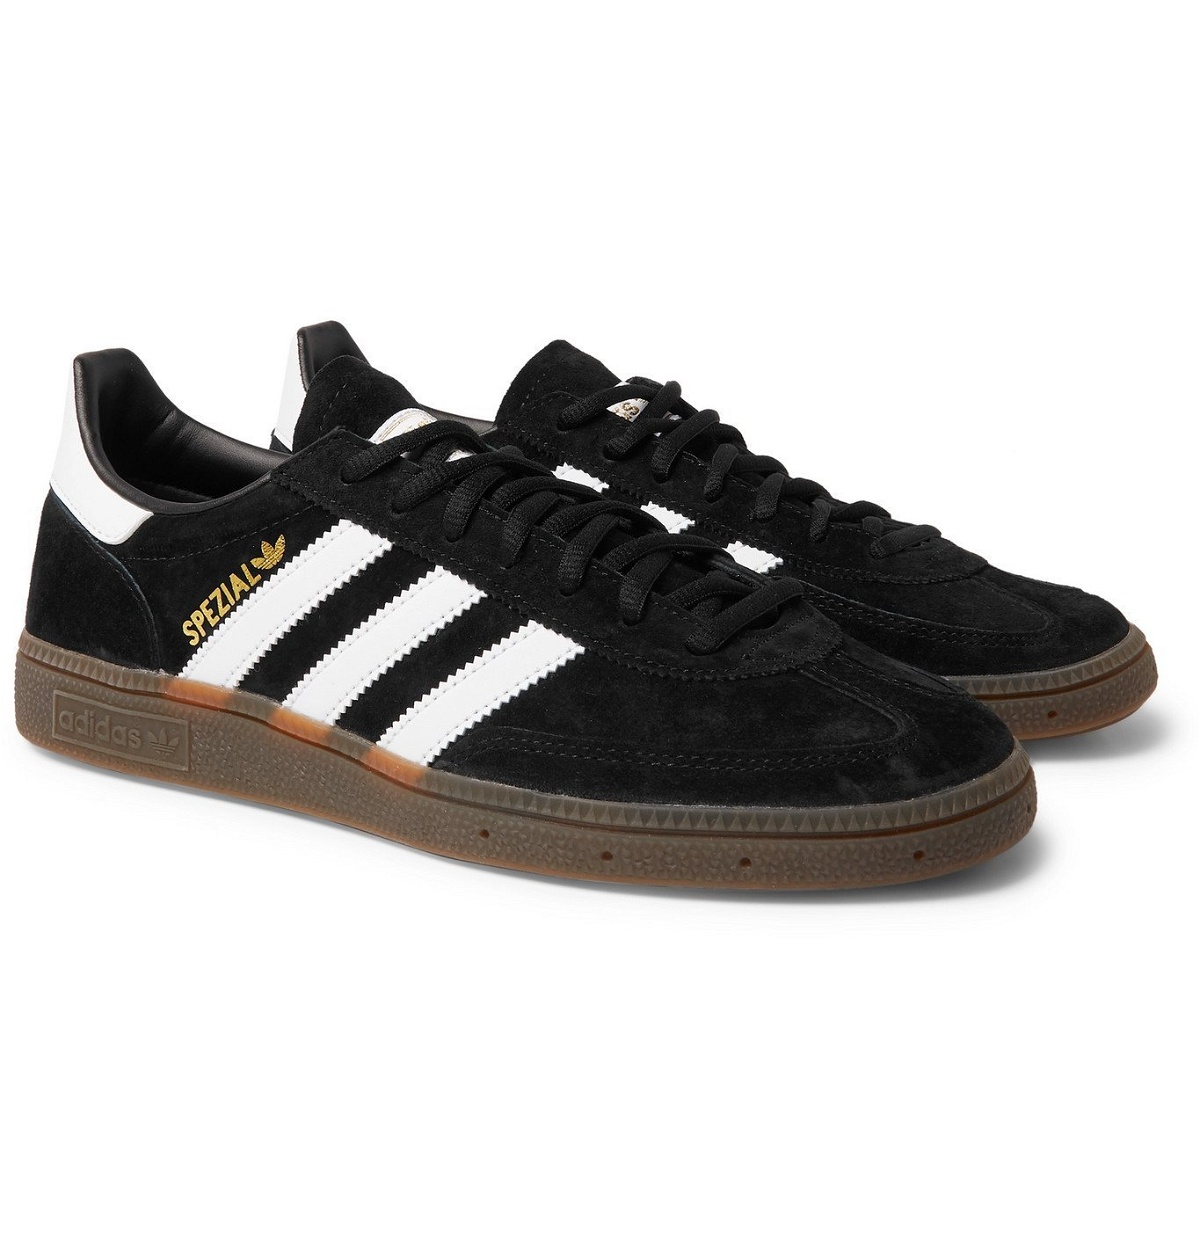 adidas Originals - Spezial Suede and Leather Sneakers - Black adidas Alexander Wang